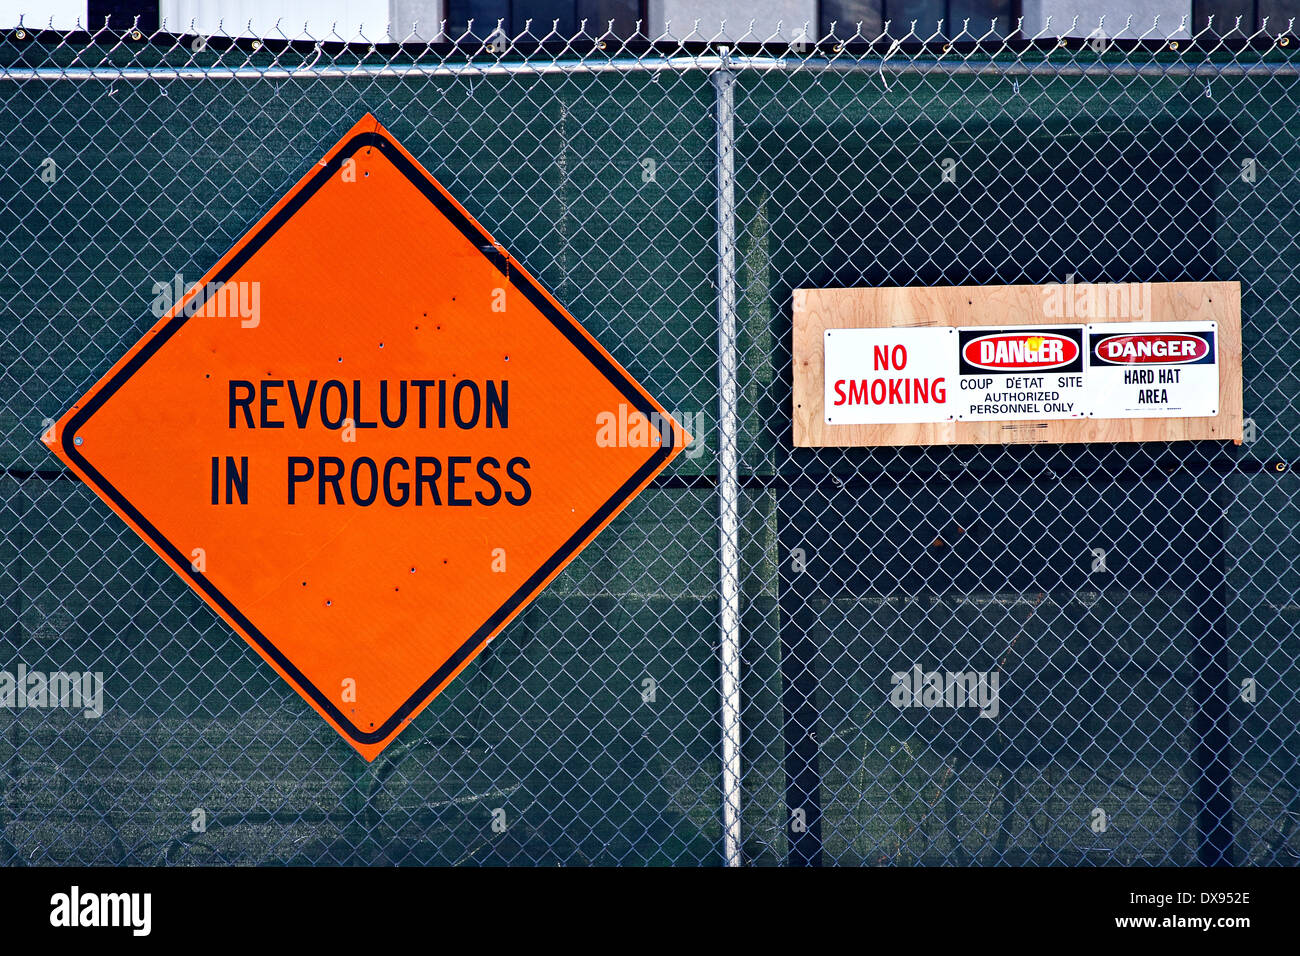 Orange 'REVOLUTION IN PROGRESS' sign on chainlink fencing along with 'DANGER coup d'état site' stapled on wooden board on right Stock Photo